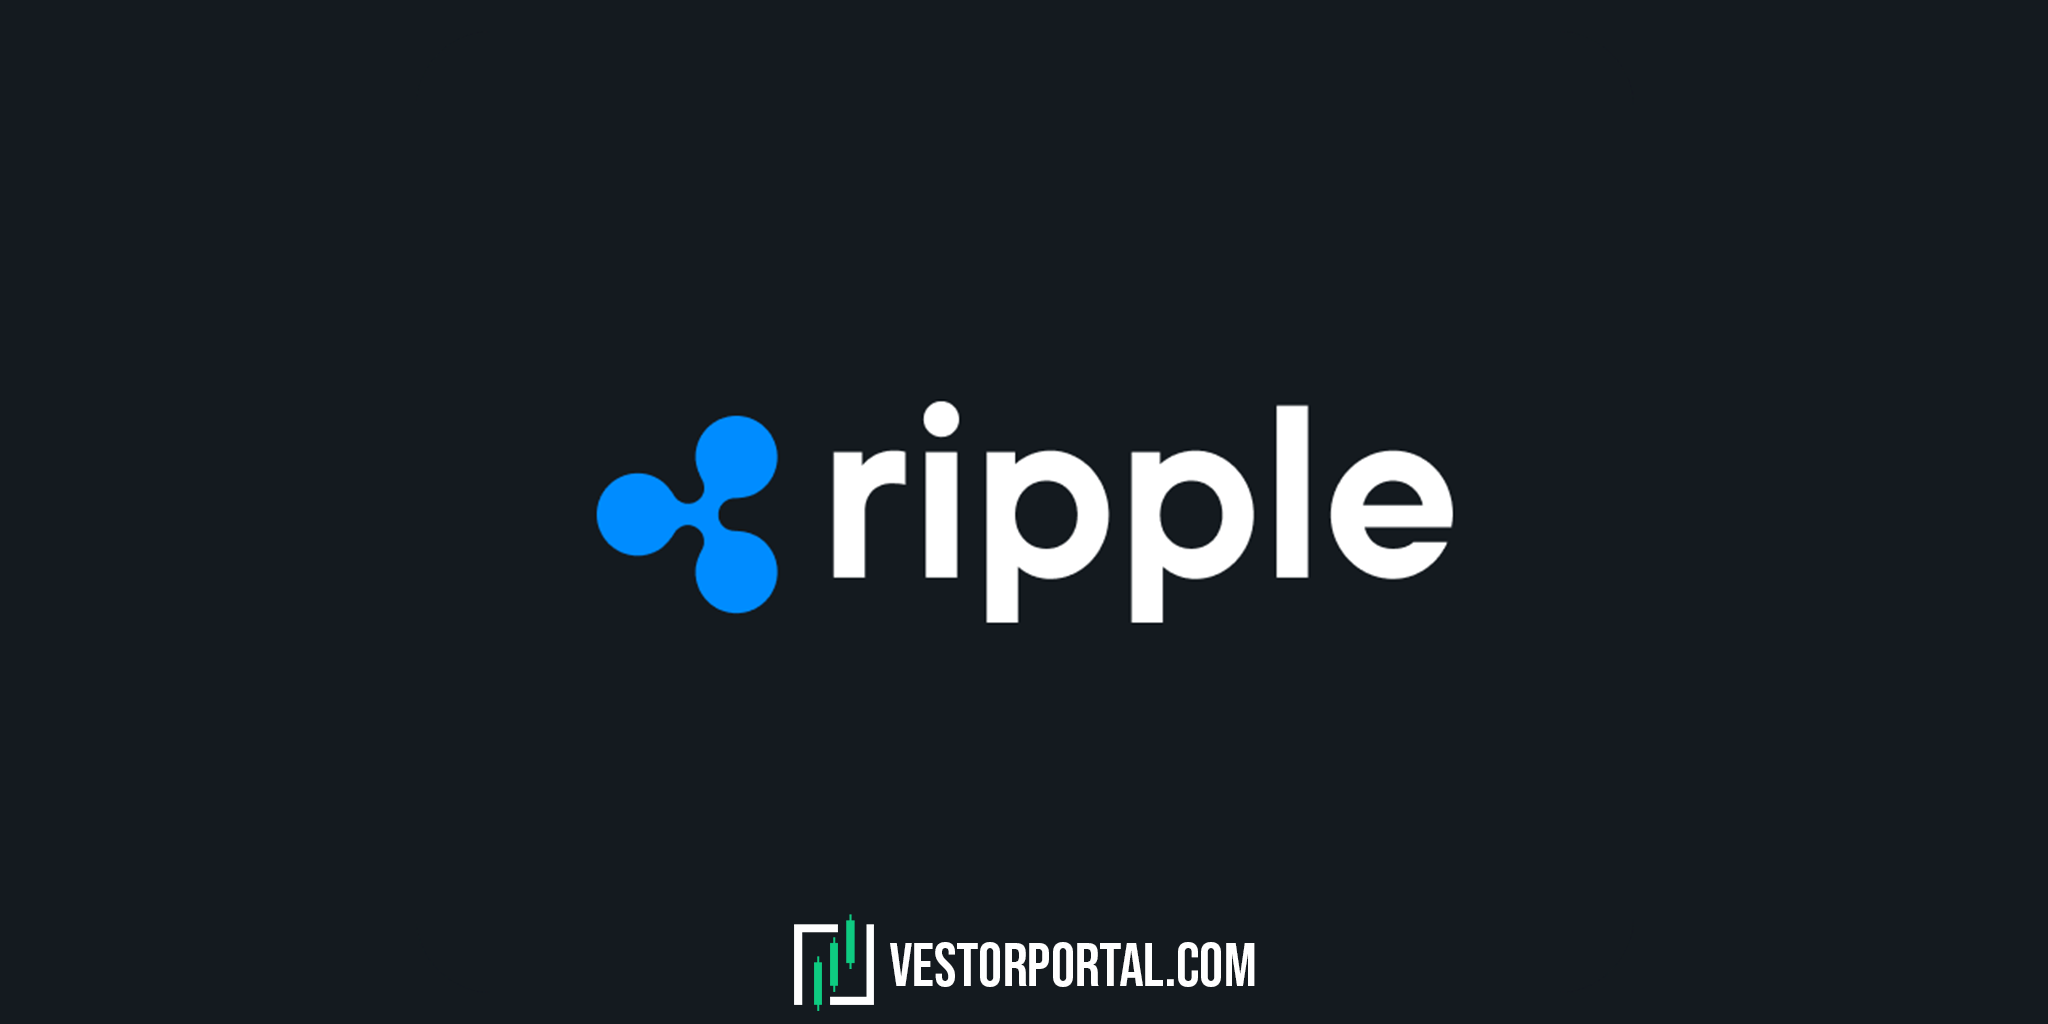 What happened to Ripple (XRP)?